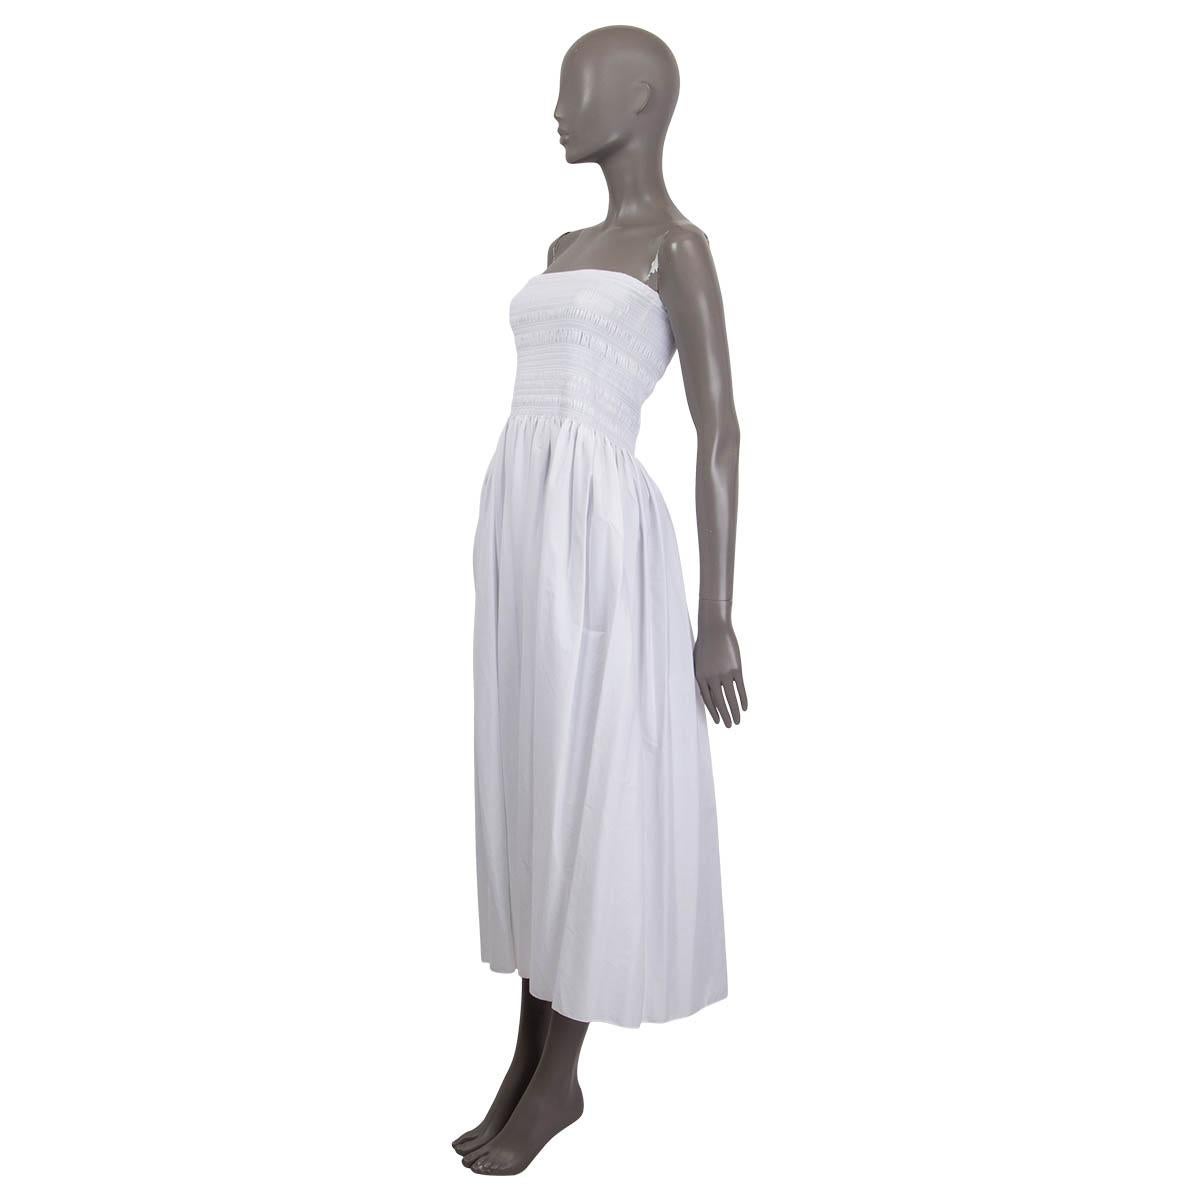 100% authentic The Row Spring 2017 Cial shirred poplin dress in white cotton (100%). Unlined. Has been worn once and is in virtually new condition. 

Measurements
Tag Size	S
Size	S
Bust	68cm (26.5in) to 102cm (39.8in)
Waist	66cm (25.7in) to 102cm